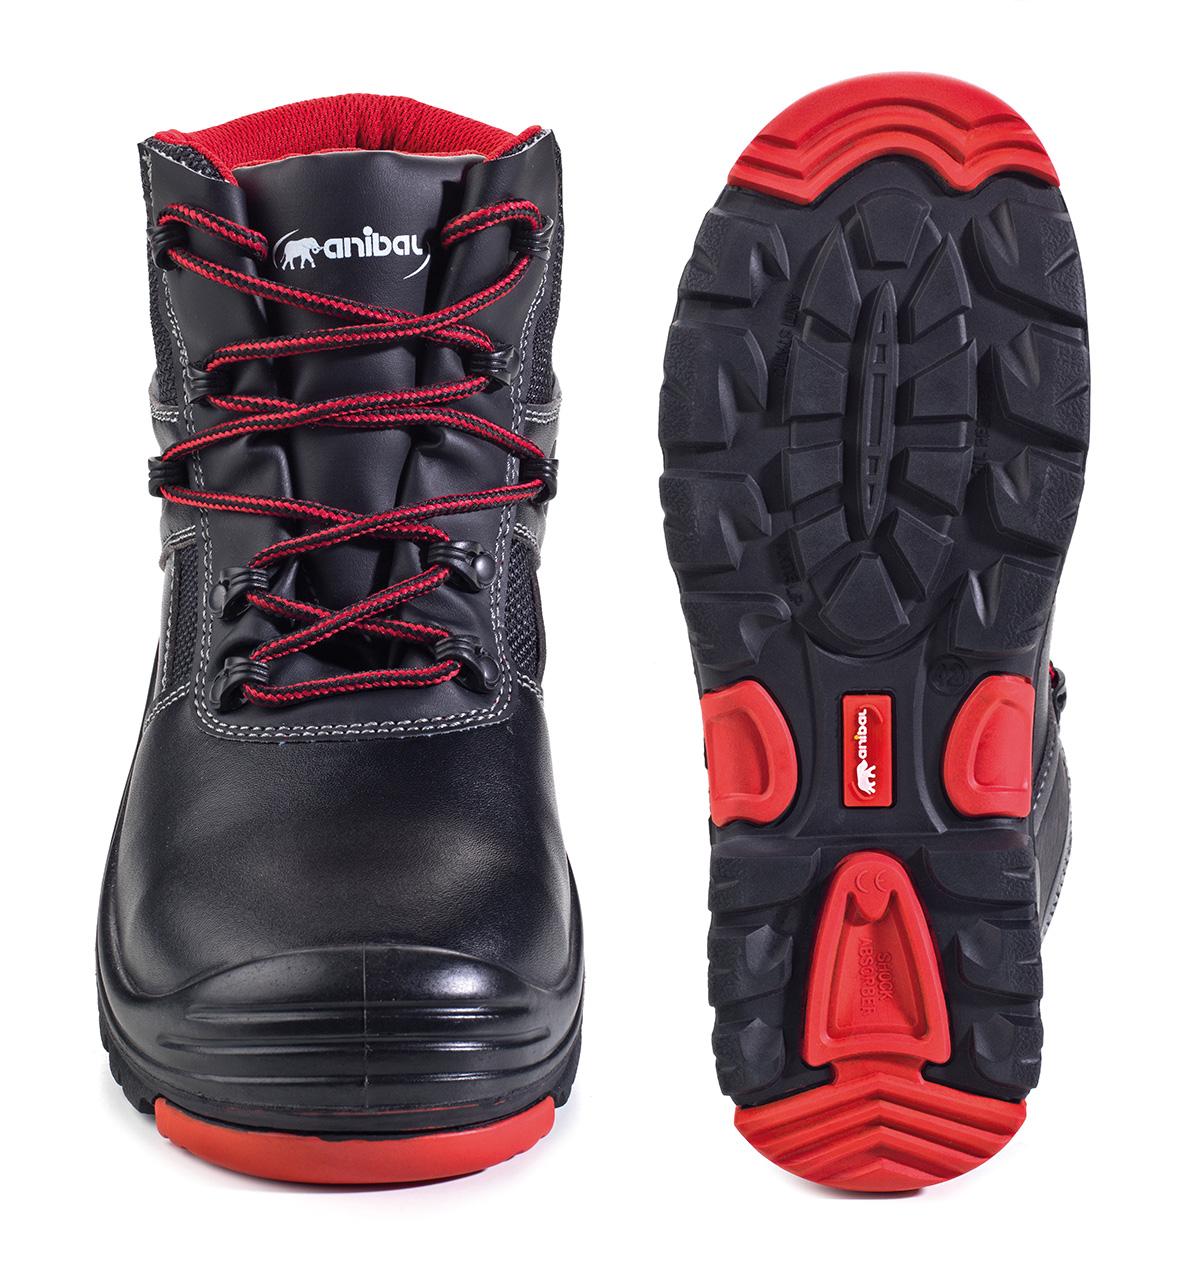 1688-BGNR Safety Footwear PU/Nitrilo Bota mod. “TRAJANO”.
Microfiber boots in S3 with double density sole Polyurethane / Rubber Nitrile. 